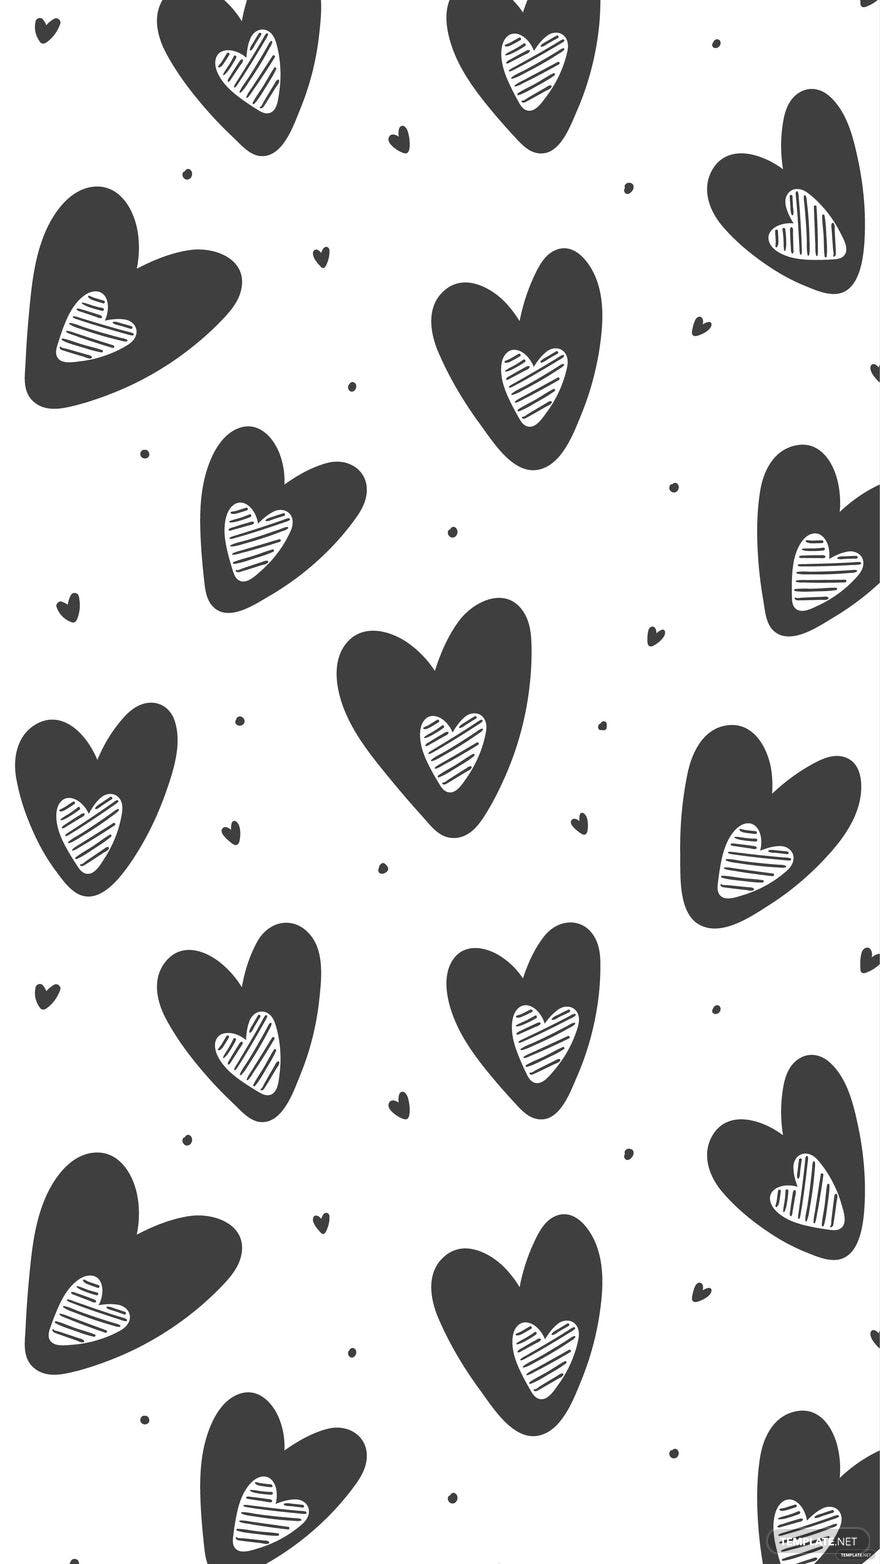 A free iPhone wallpaper with a pattern of black hearts on a white background - Black heart, black and white